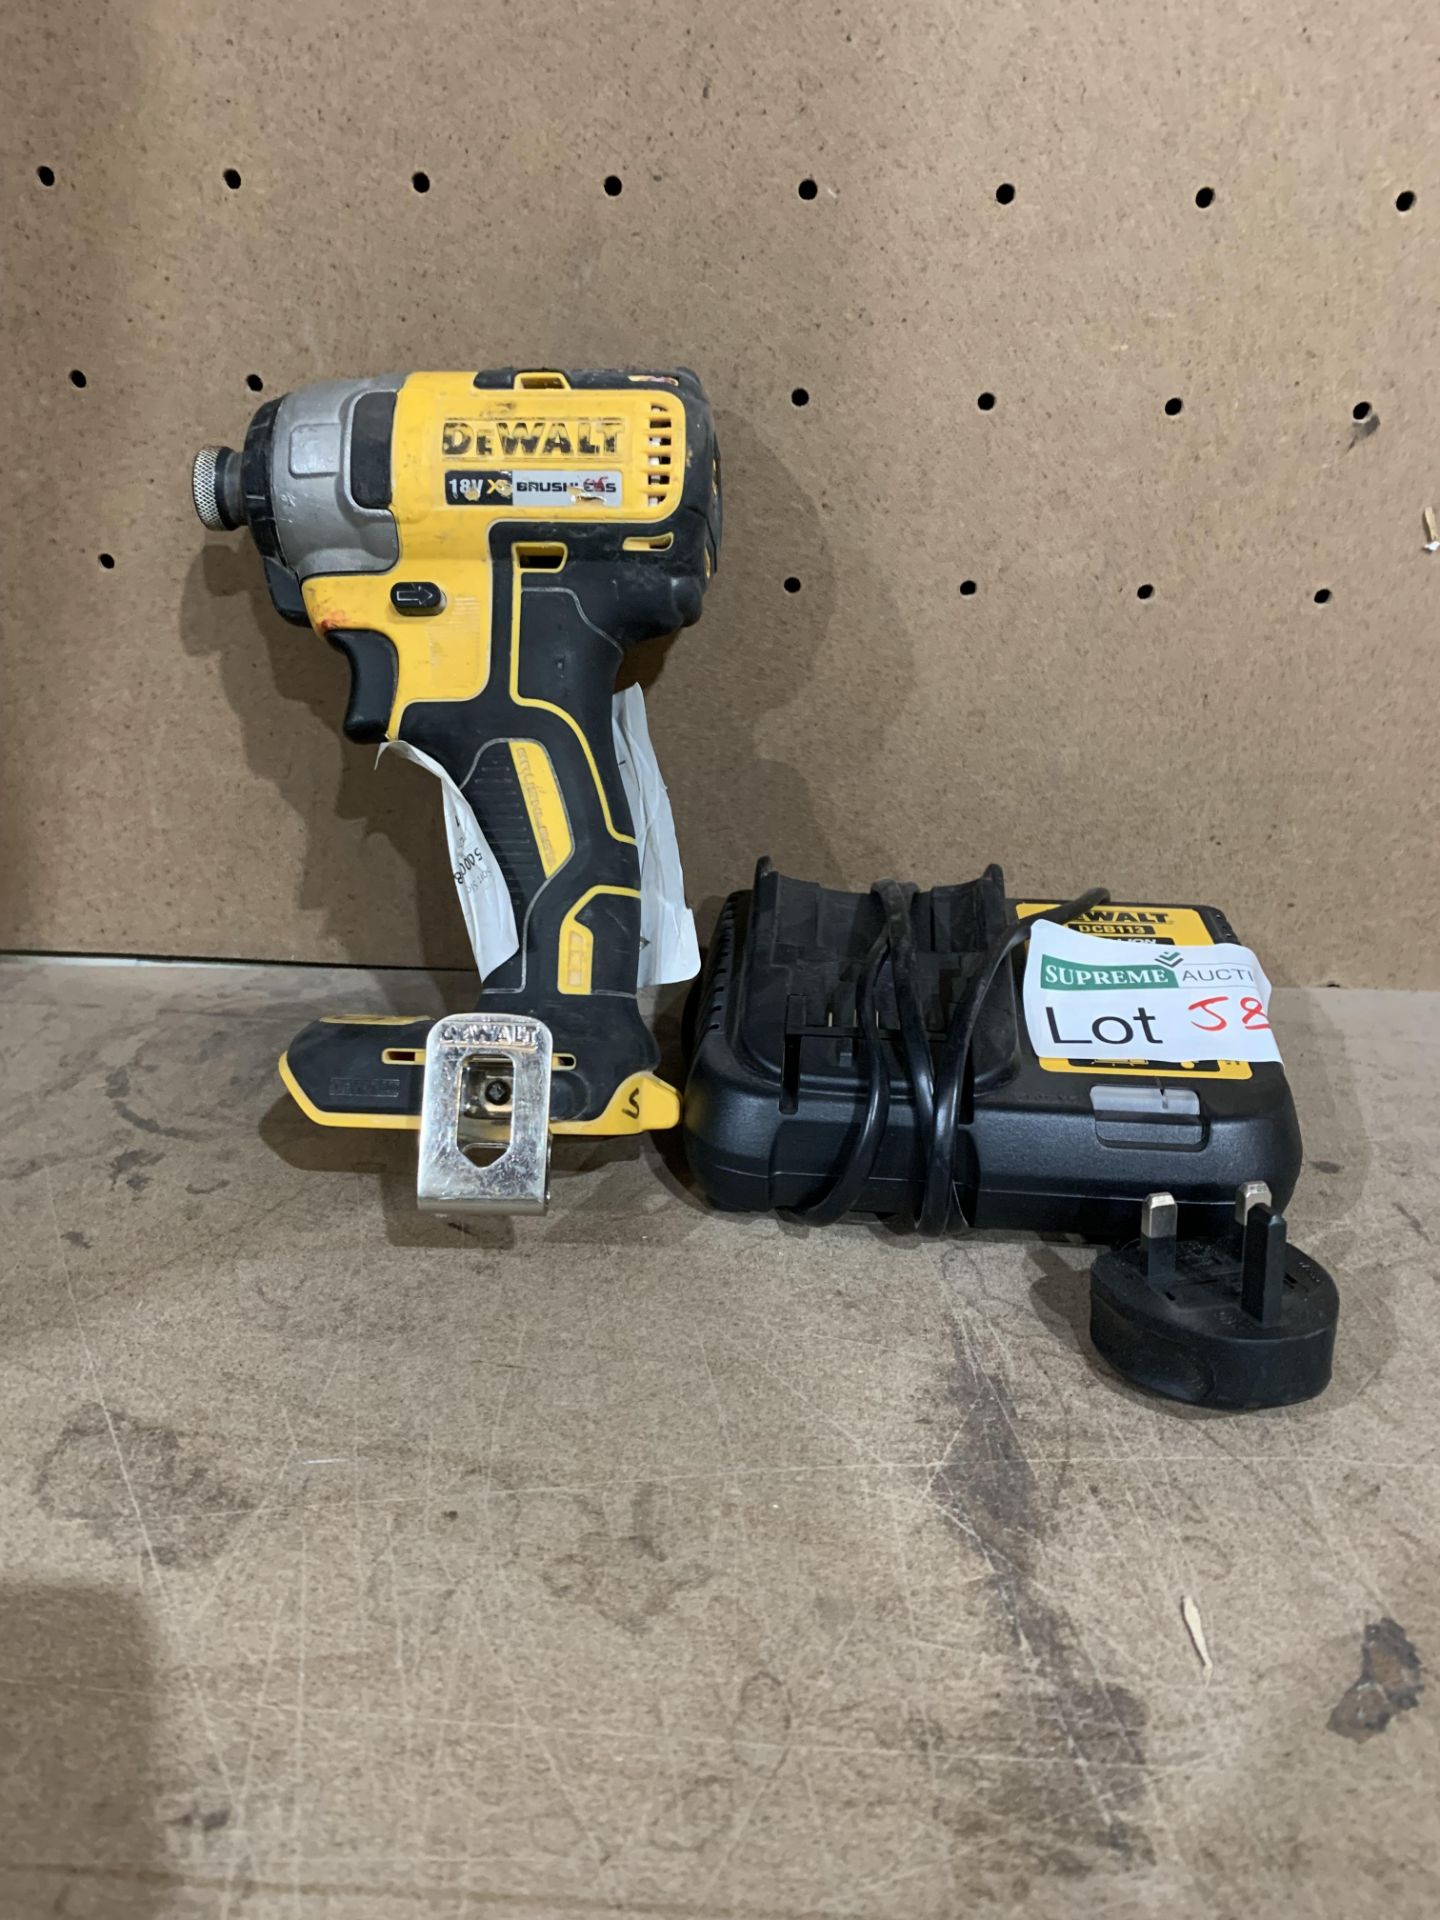 DEWALT DCF787N-XJ 18V LI-ION XR BRUSHLESS CORDLESS IMPACT DRIVER COMES WITH CHARGER (UNCHECKED,